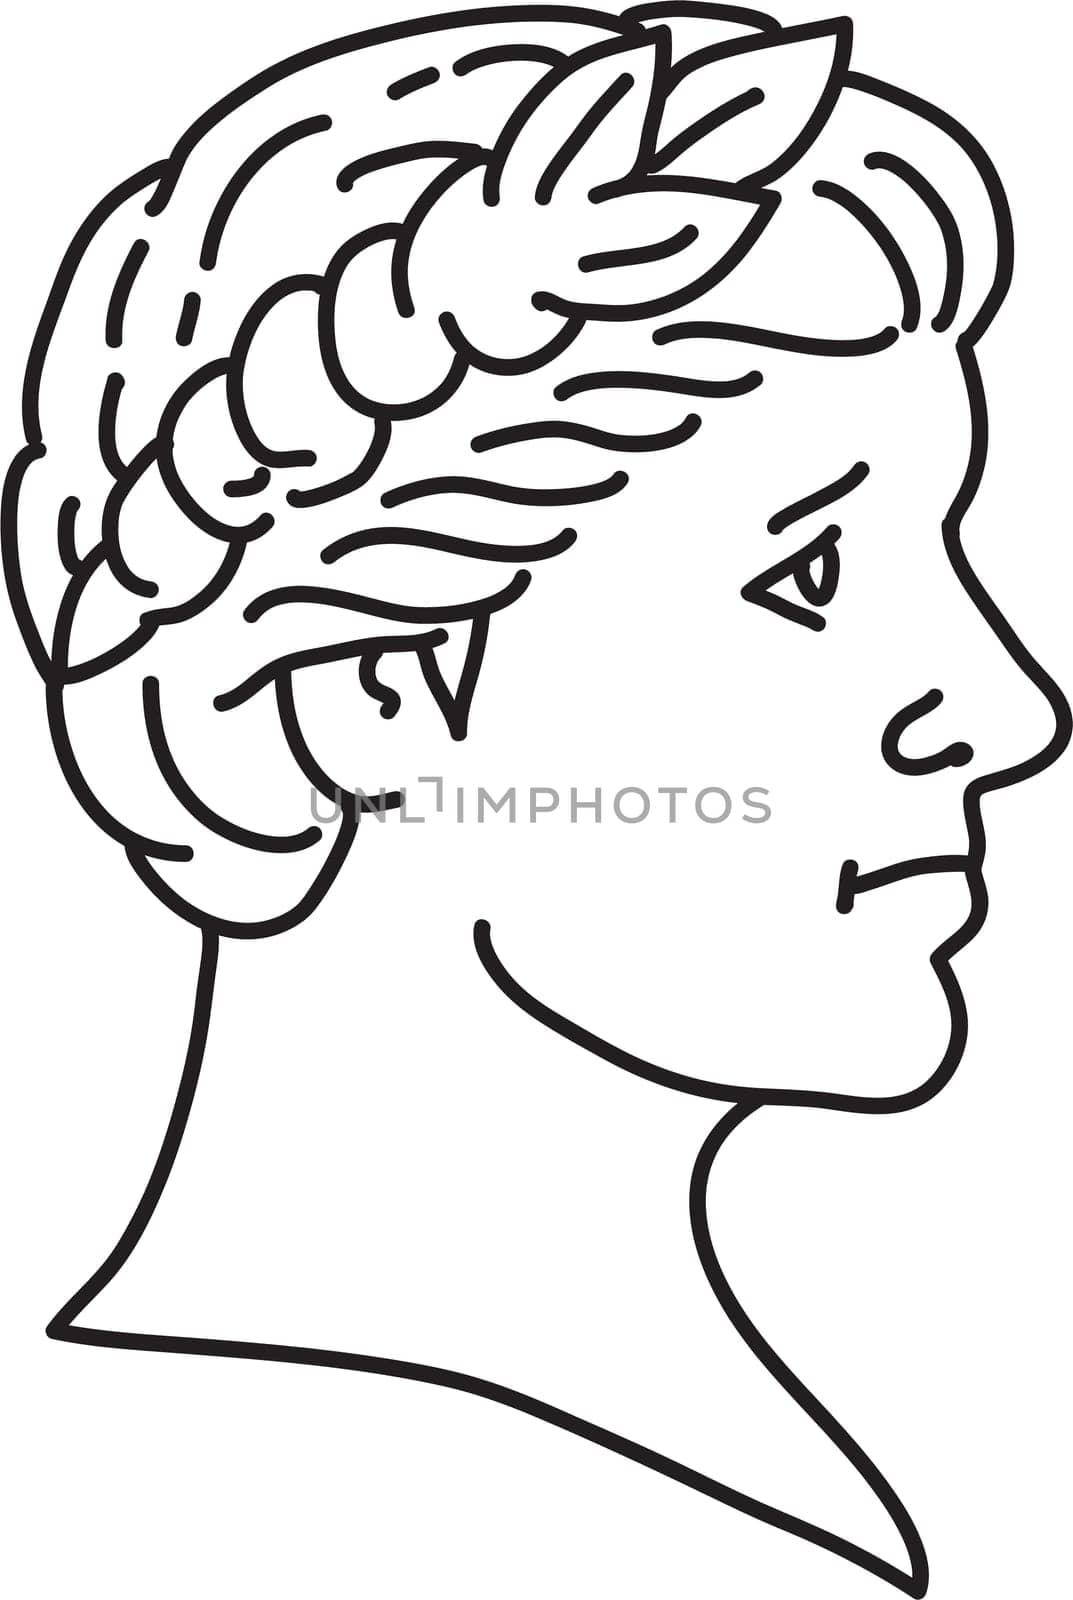 Mono line illustration of bust of an ancient Roman emperor, senator or Caesar, ruler of the Roman Empire during the imperial period wearing crown of laurel leaves side view done in monoline line art style.